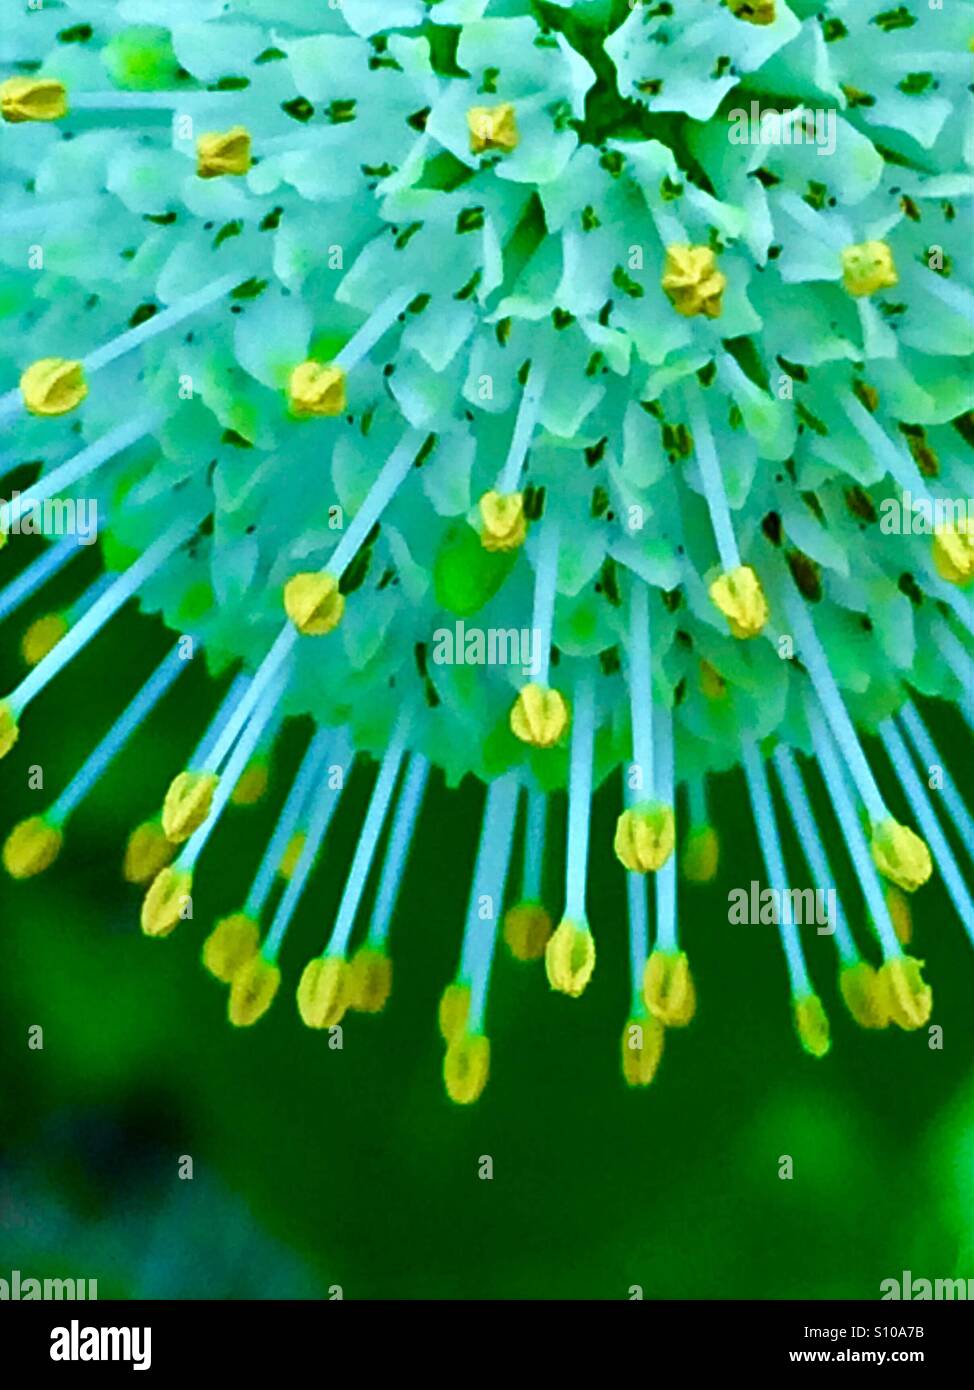 Macro view of the yellow-tipped stamens of a Button Bush flower, Cephalanthes occidentalis Stock Photo